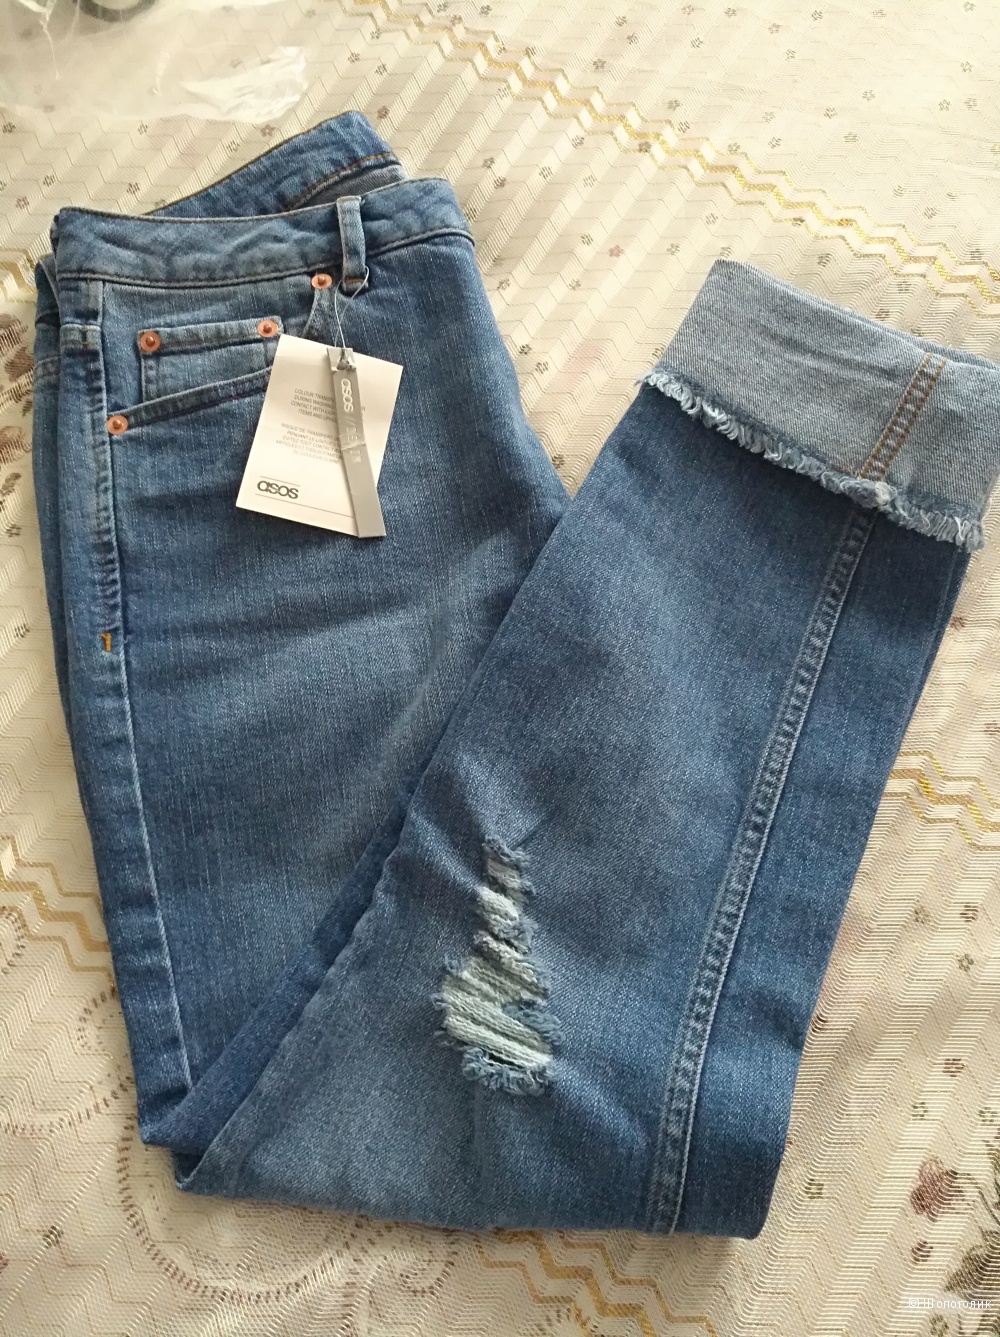 ASOS PETITE Kimmi Shrunken Boyfriend Jeans in Rio Wash with Rips and Turn Up - Blue / W26 L29